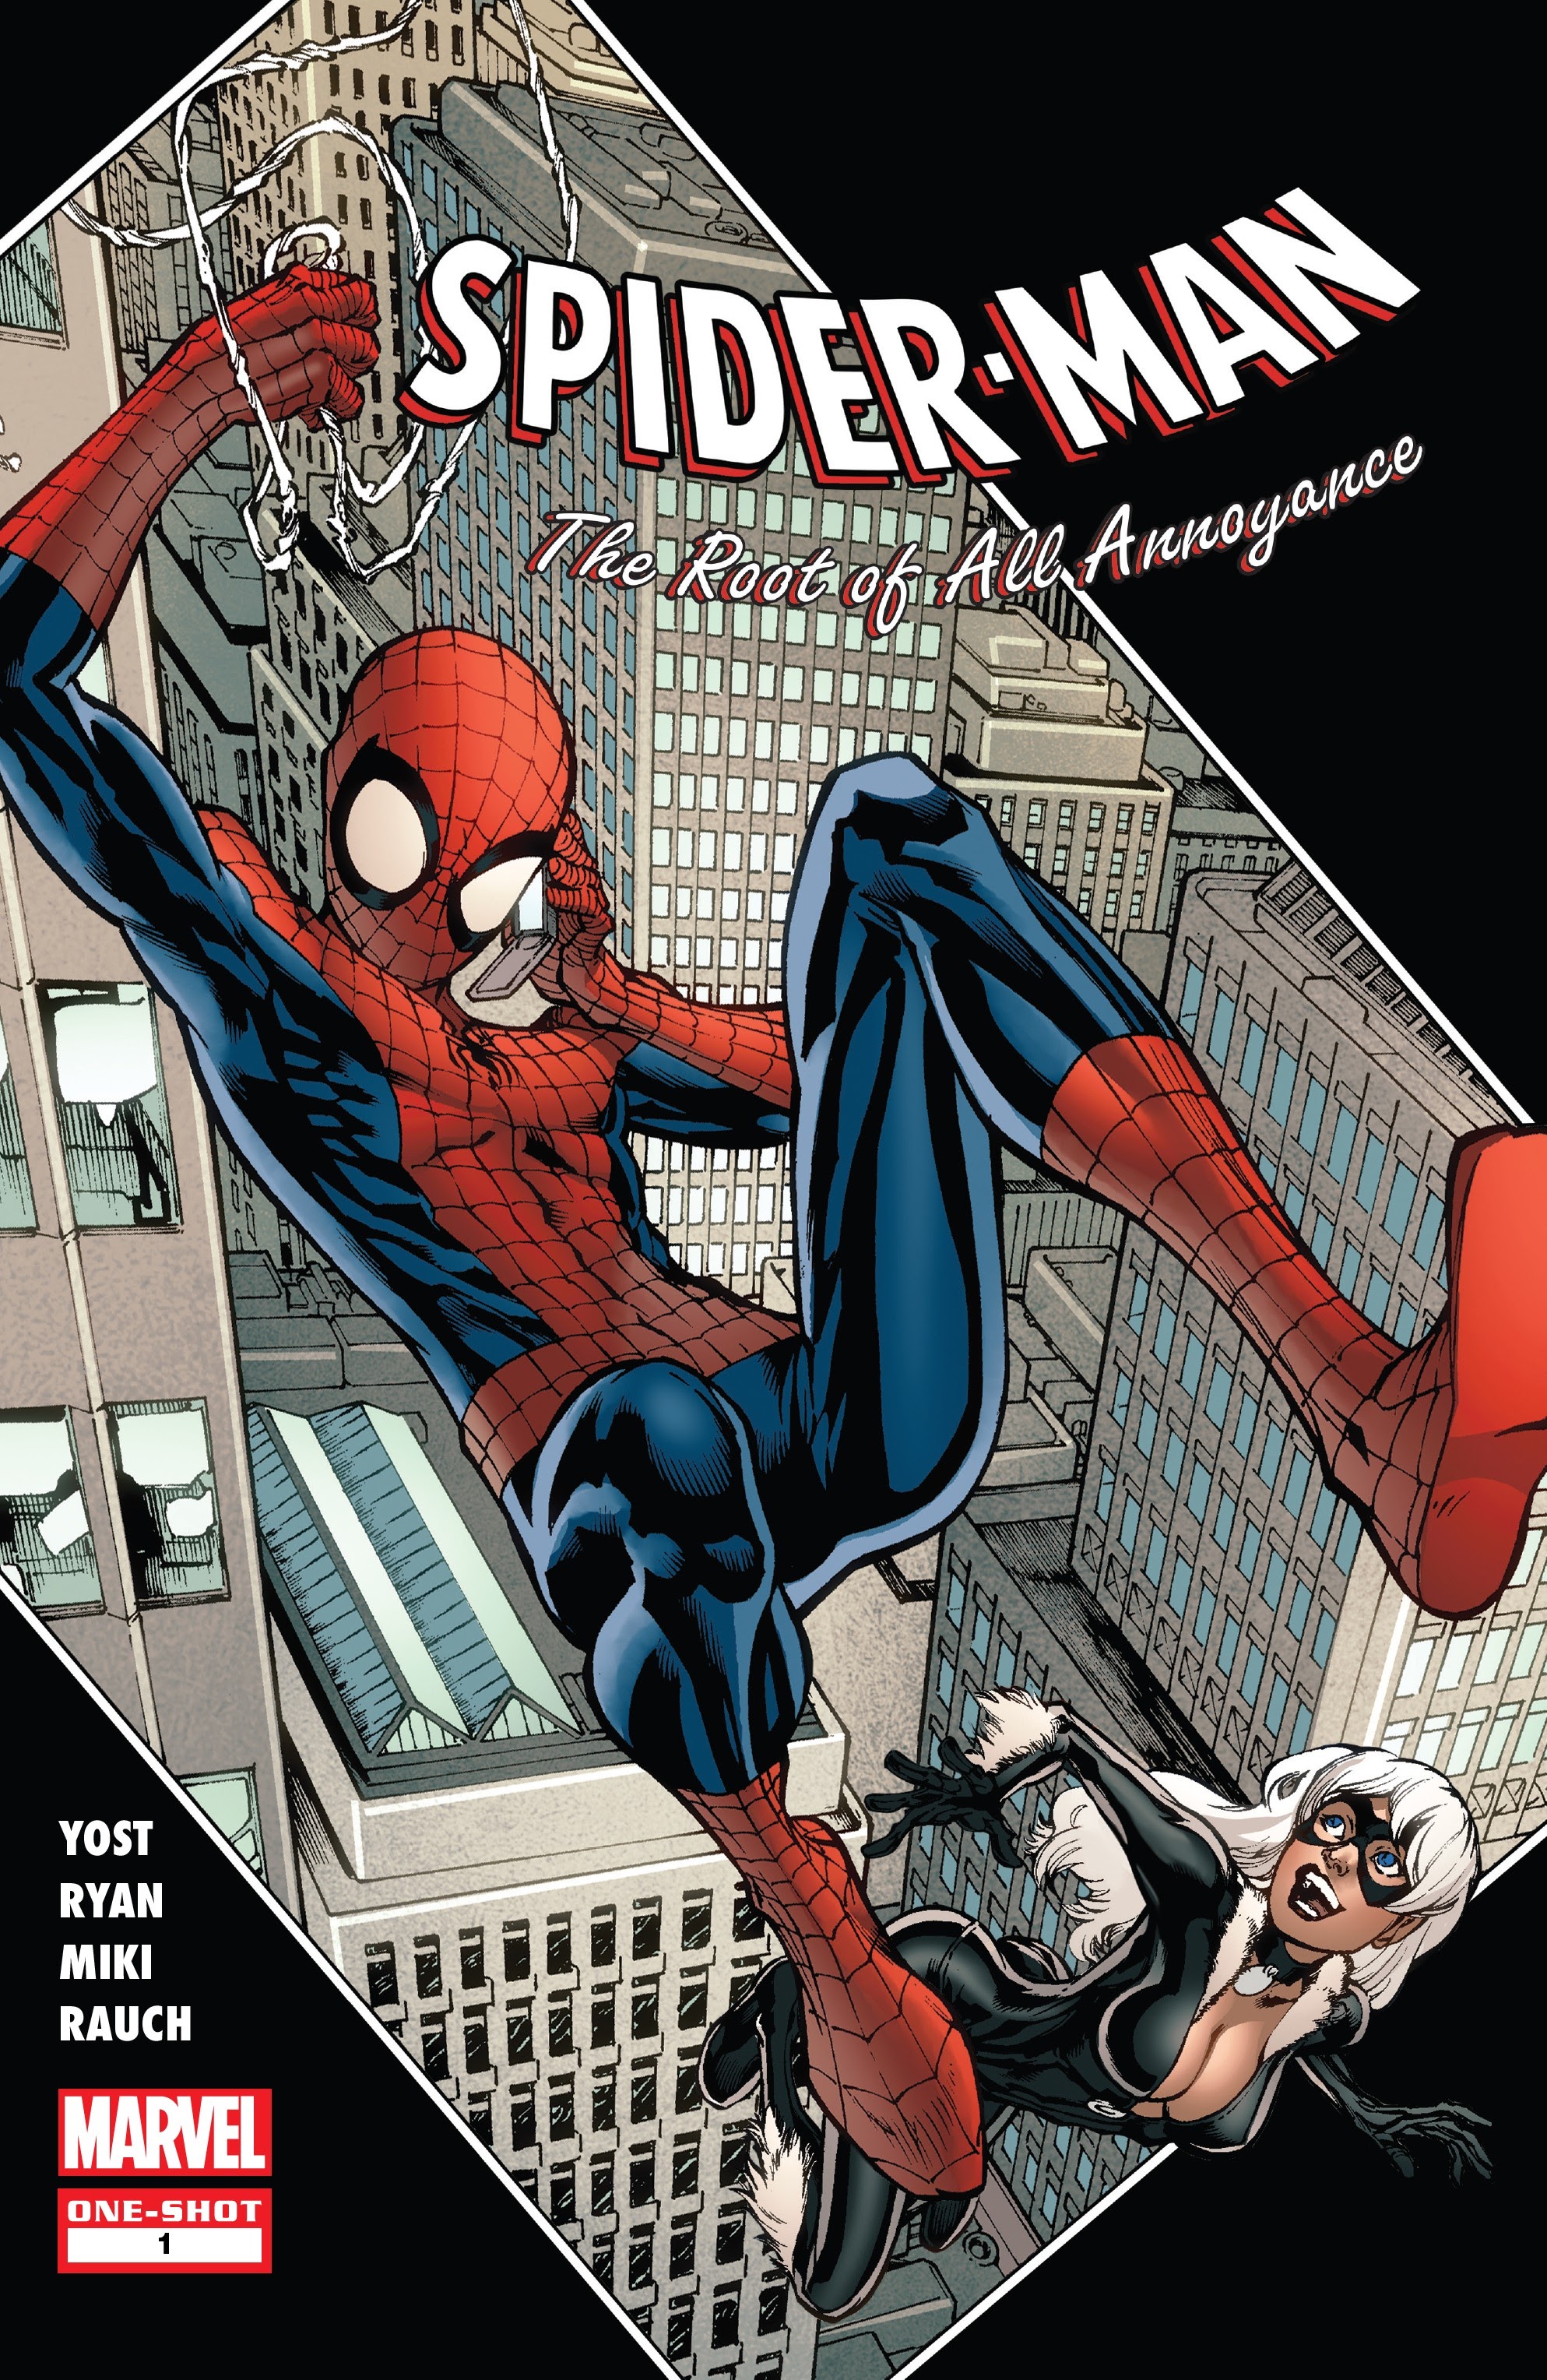 Read online Spider-Man: The Root of All Annoyance comic -  Issue # Full - 1